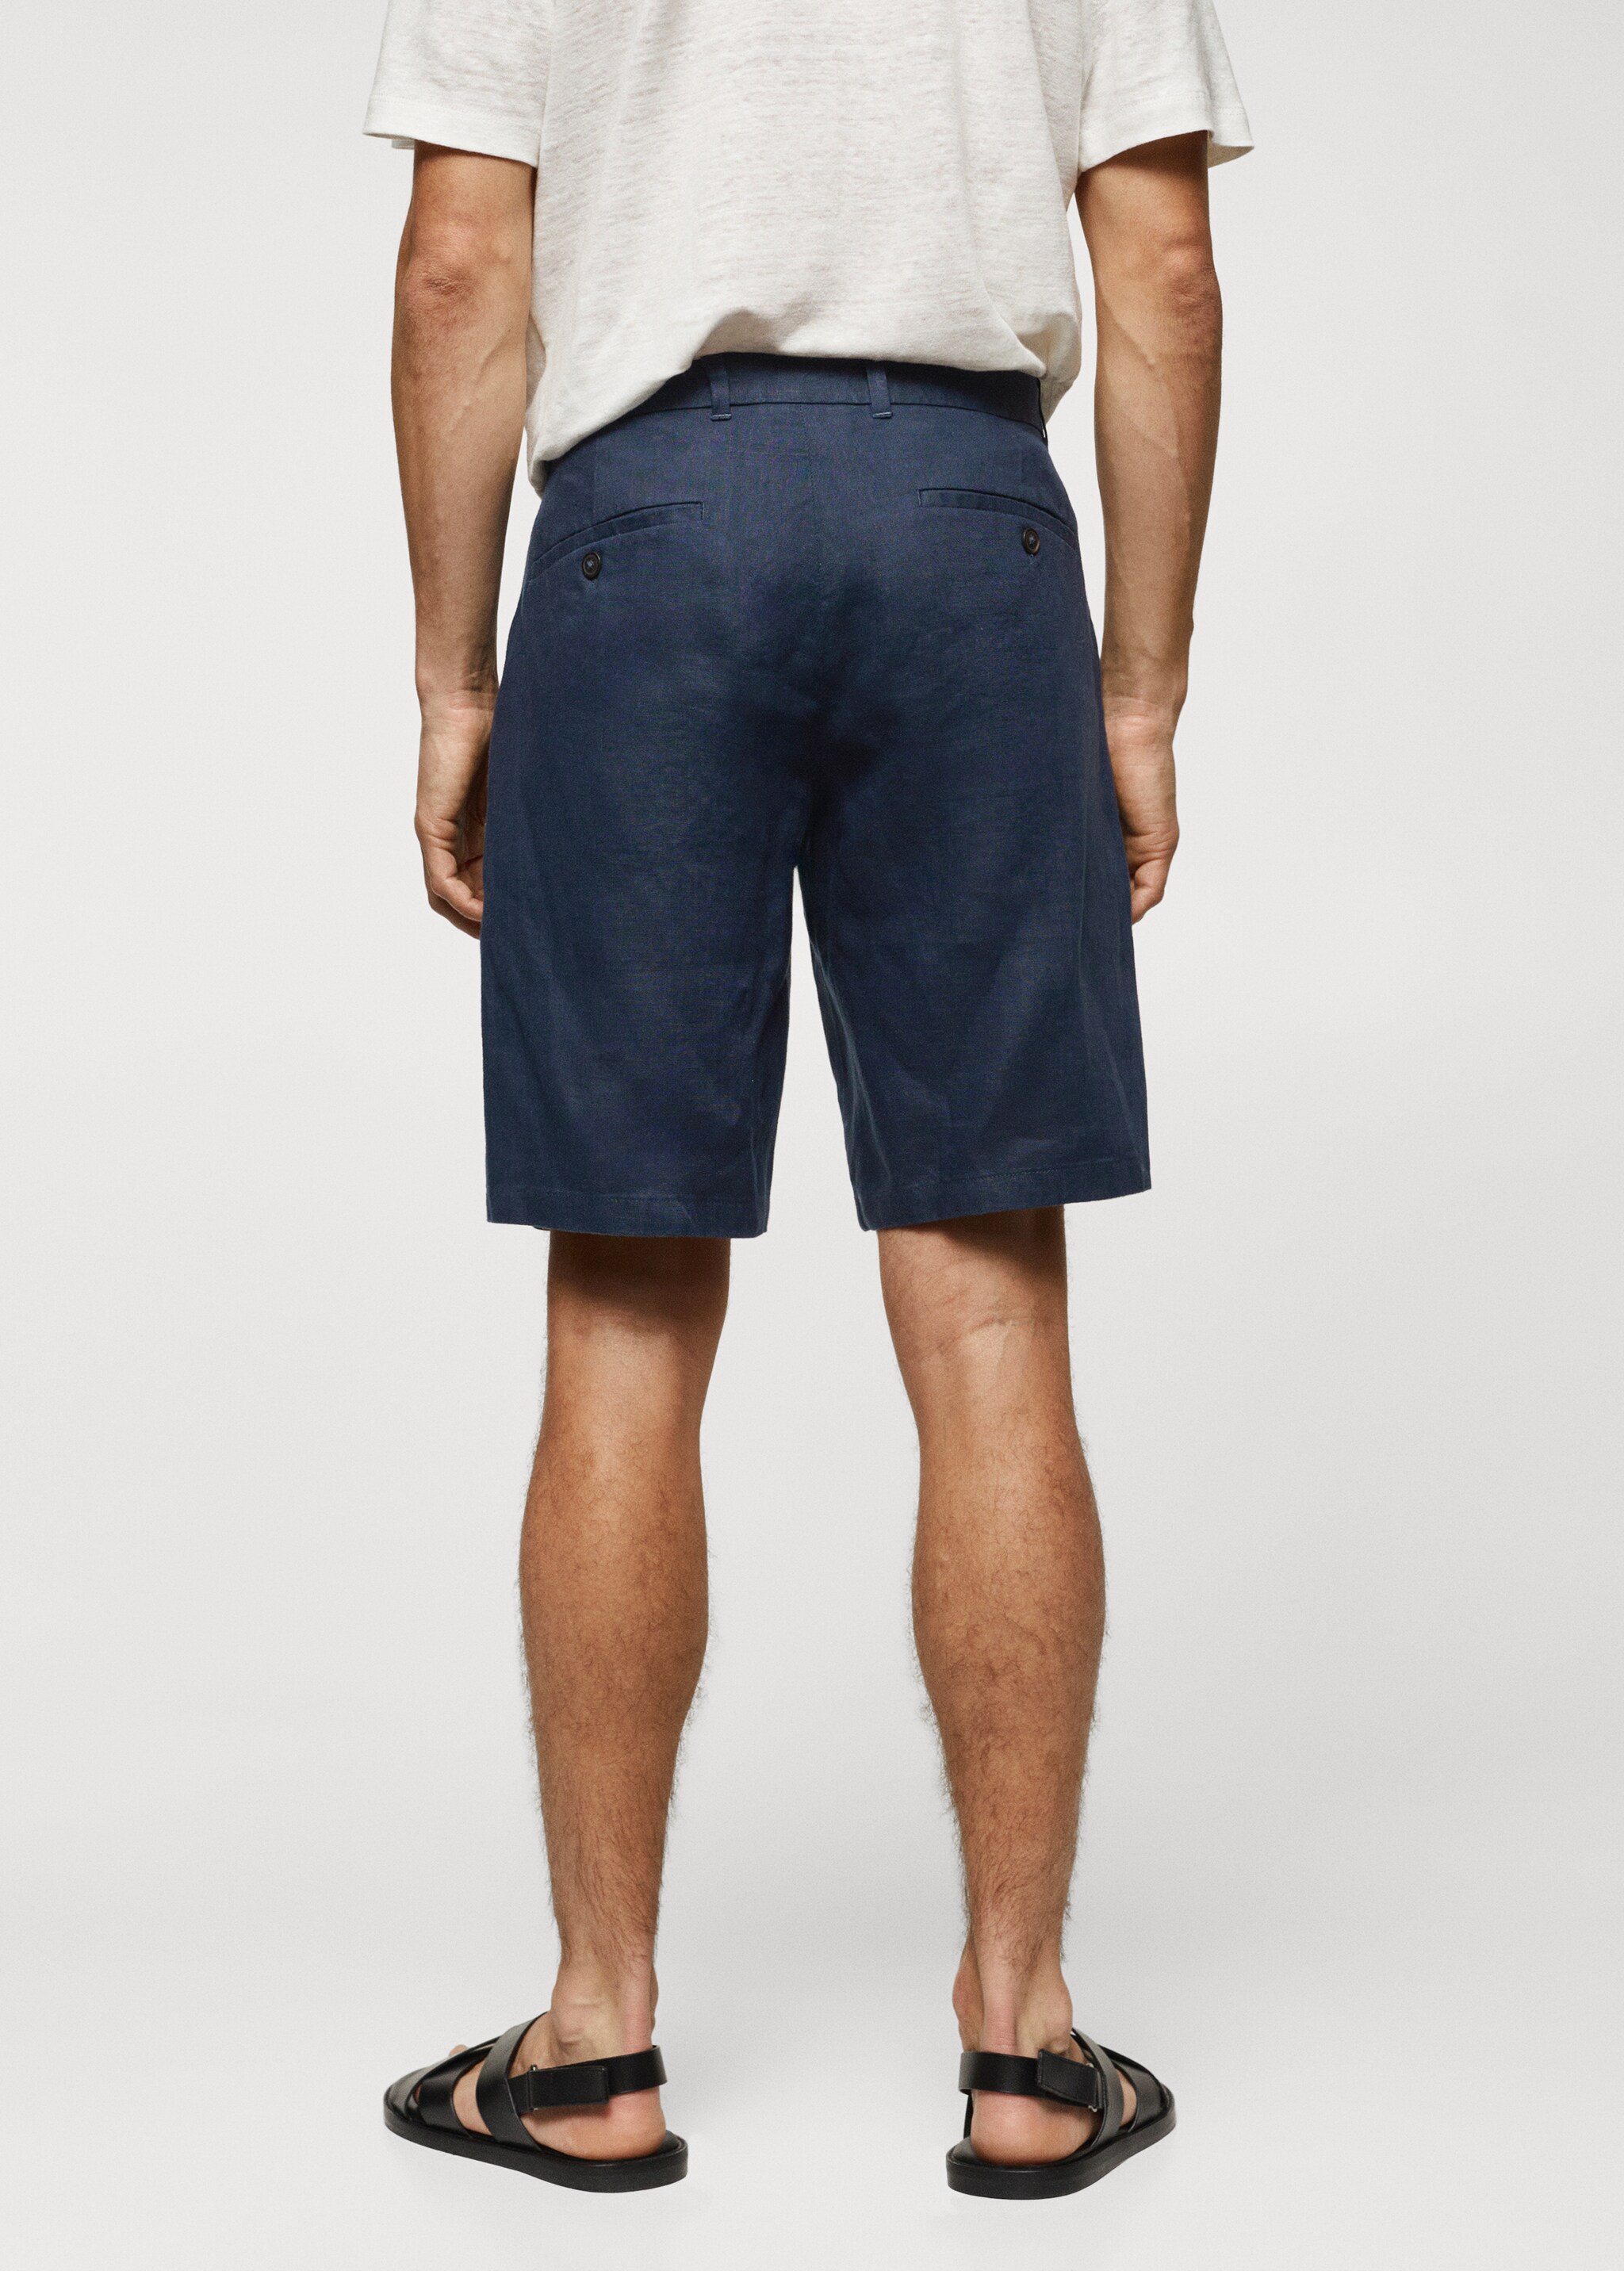 100% linen shorts - Reverse of the article